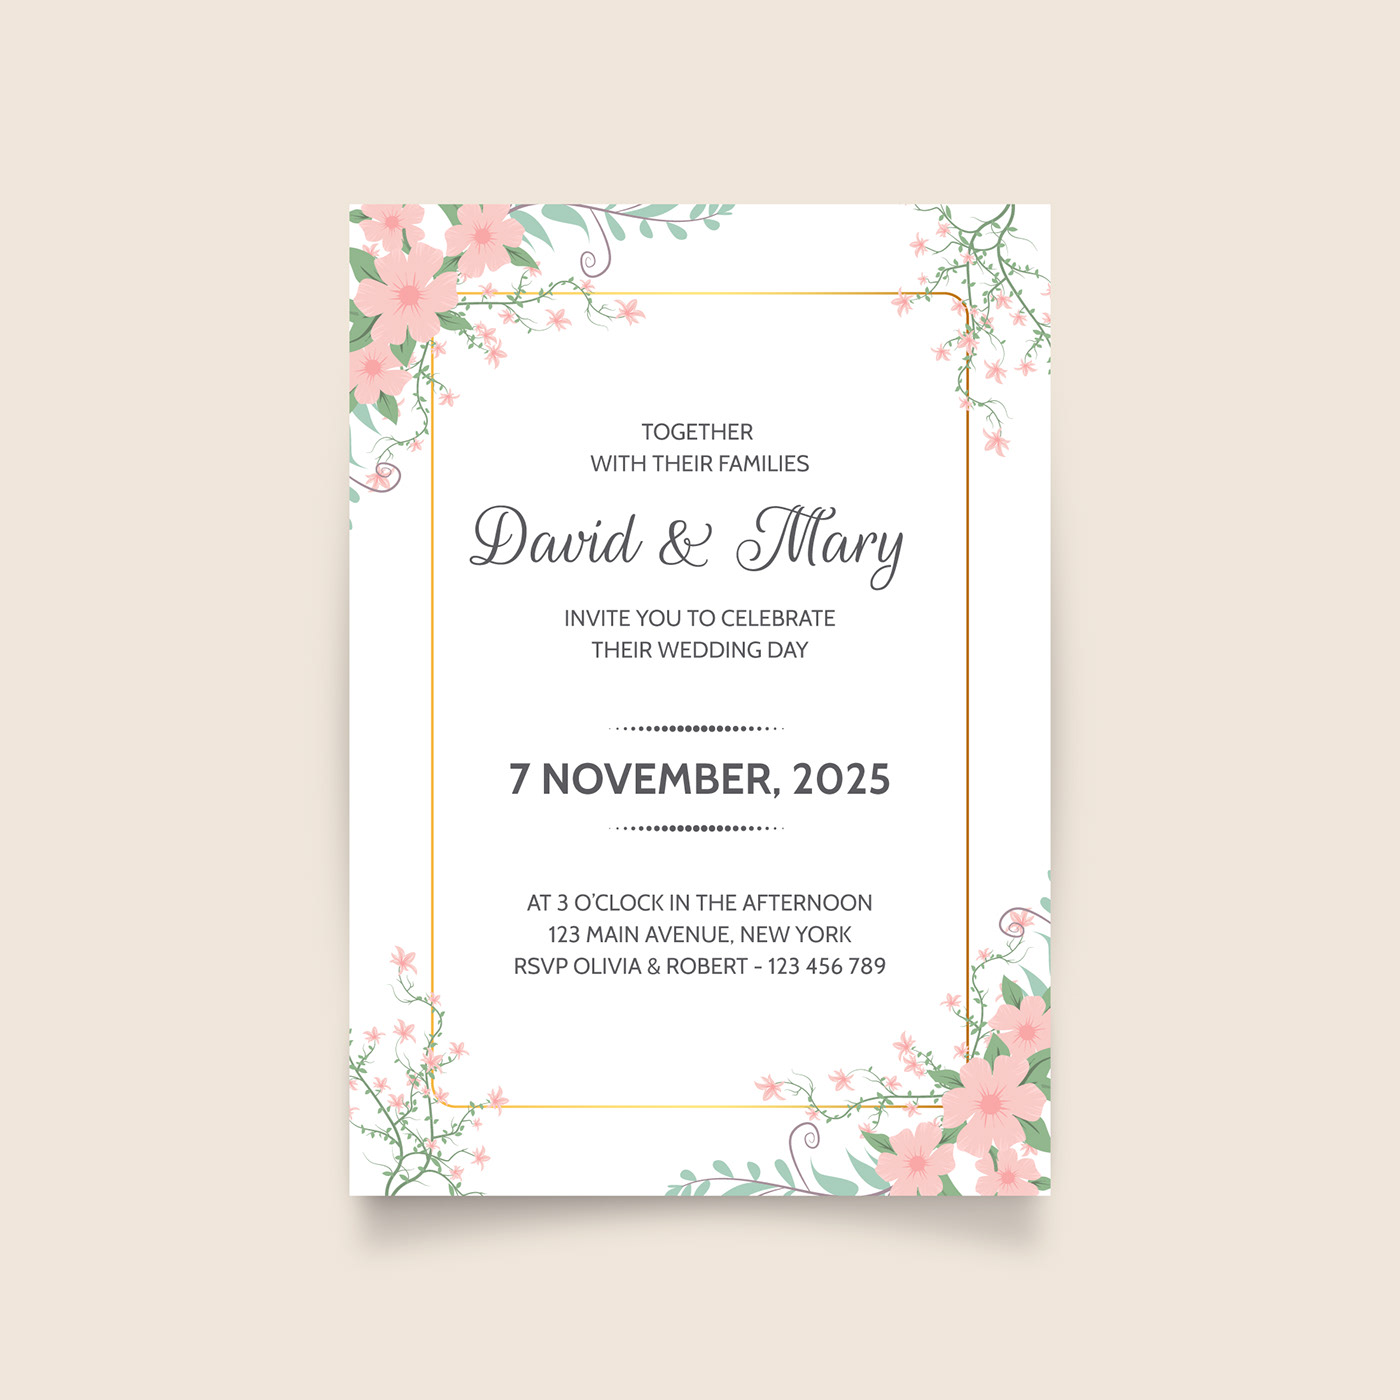 Wedding invitation template Free Download on Behance Throughout Free E Wedding Invitation Card Templates